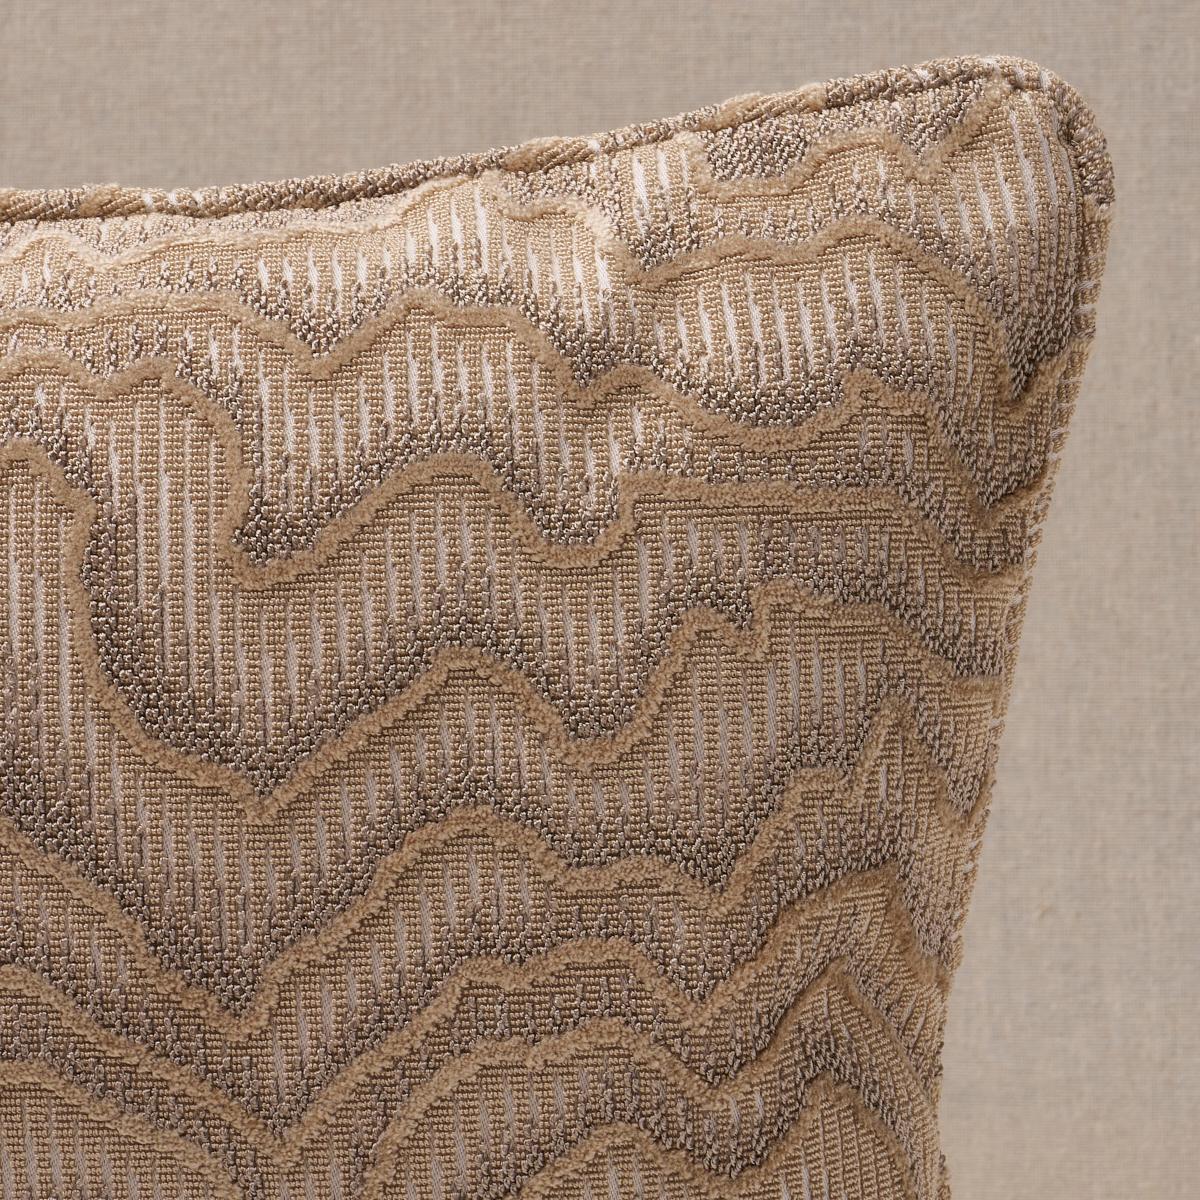 This pillow features Zambezi Velvet with a self welt finish. Its abstract topographical pattern and extraordinary cut-and-loop pile texture makes Zambezi Velvet in champagne a versatile mid-scale design that traverses decorating styles. Pillow